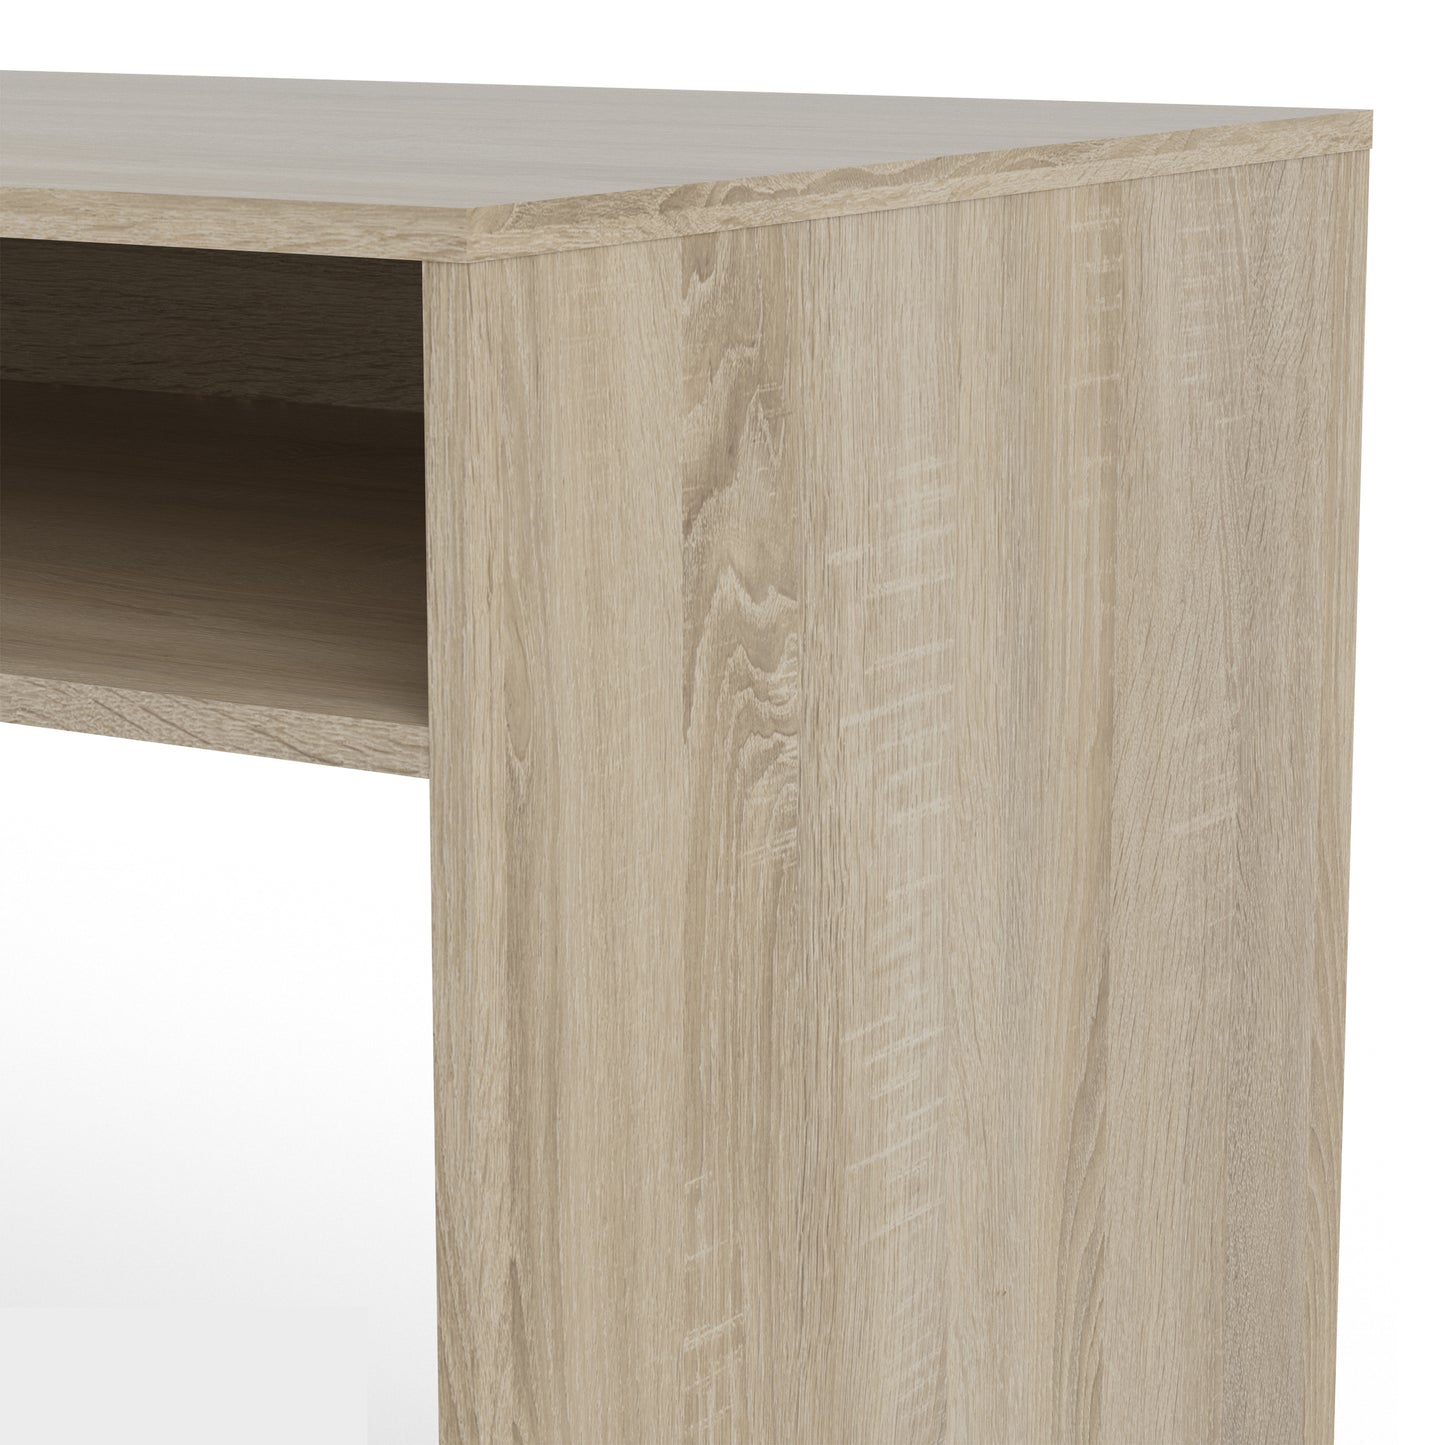 Function Plus  Desk multi-functional Desk with Drawer and 1 Door in White and Oak